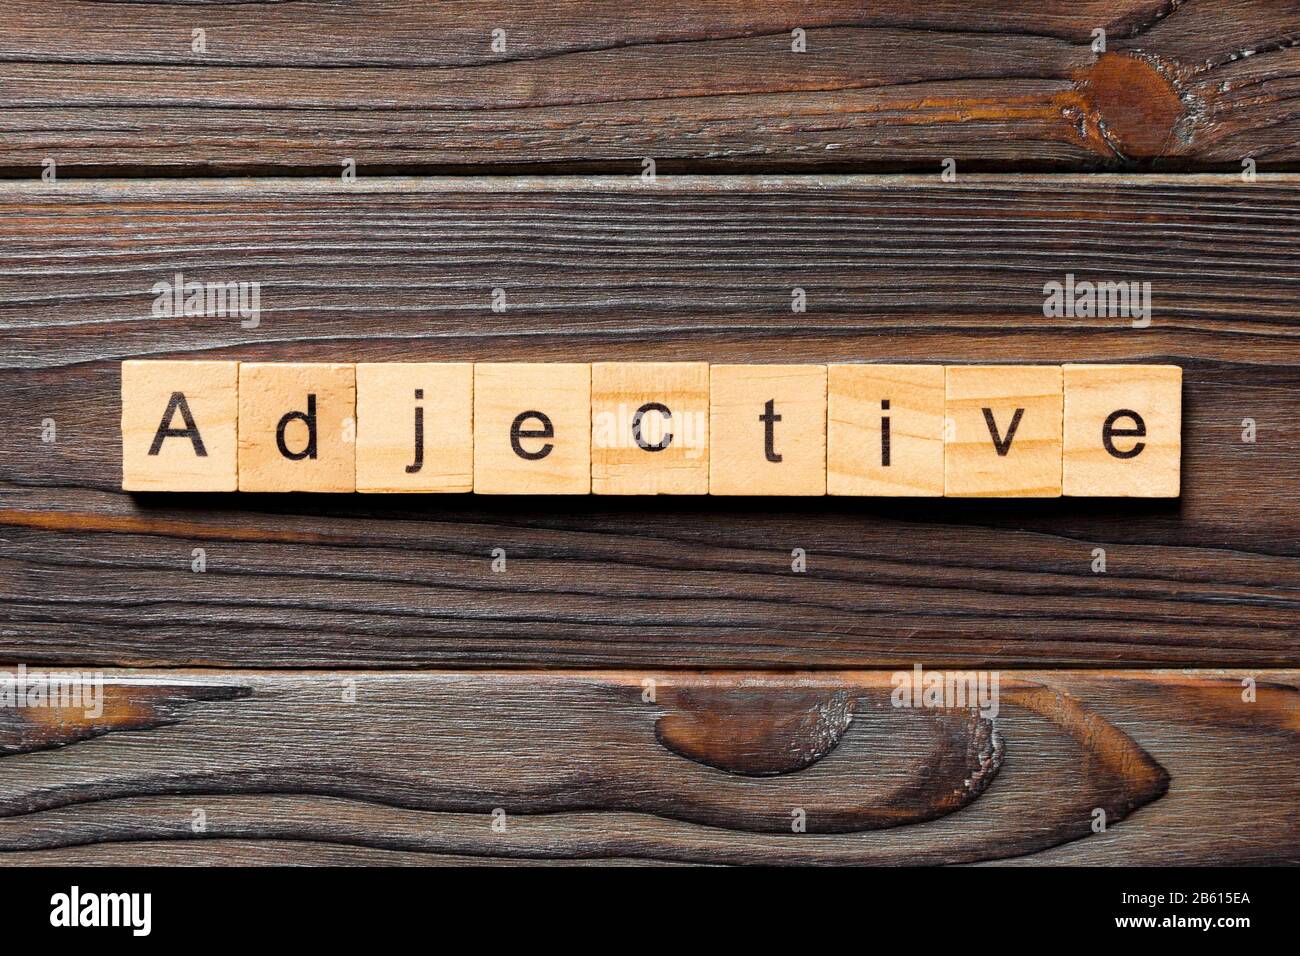 adjective word written on wood block. adjective text on wooden table for your desing, concept. Stock Photo